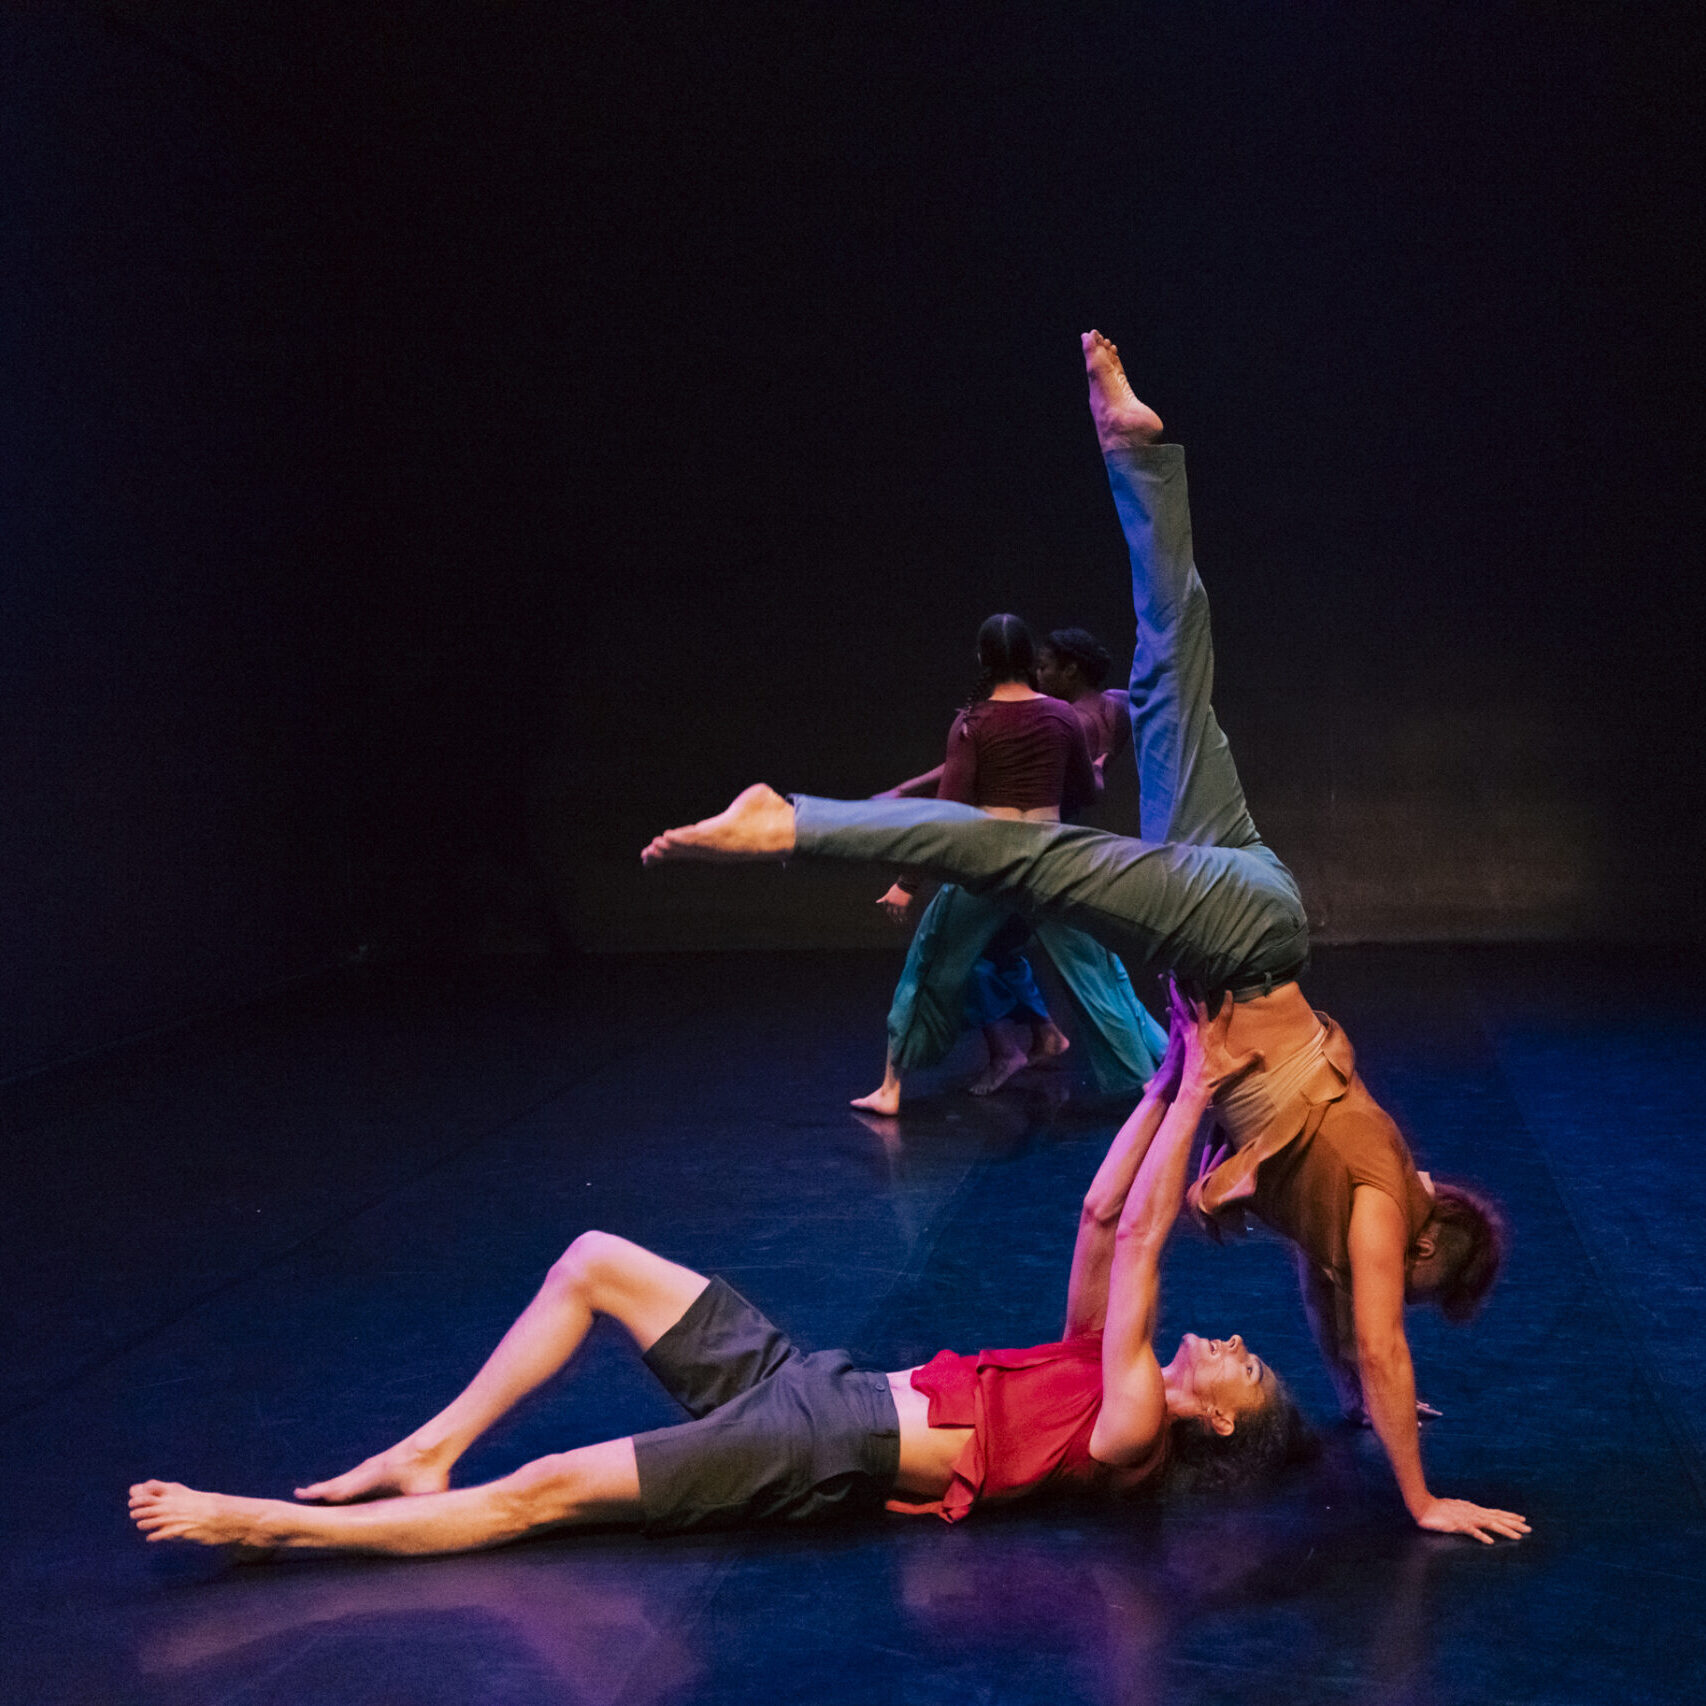 Photo of 4 dancers, in the foreground a dancer lies on their back with their arms raise supporting another dancer who is upside down in a hand stand position with their legs splayed. The lighting around the dancers is mostly black except for the light on the dancers and the floor is dark blue.